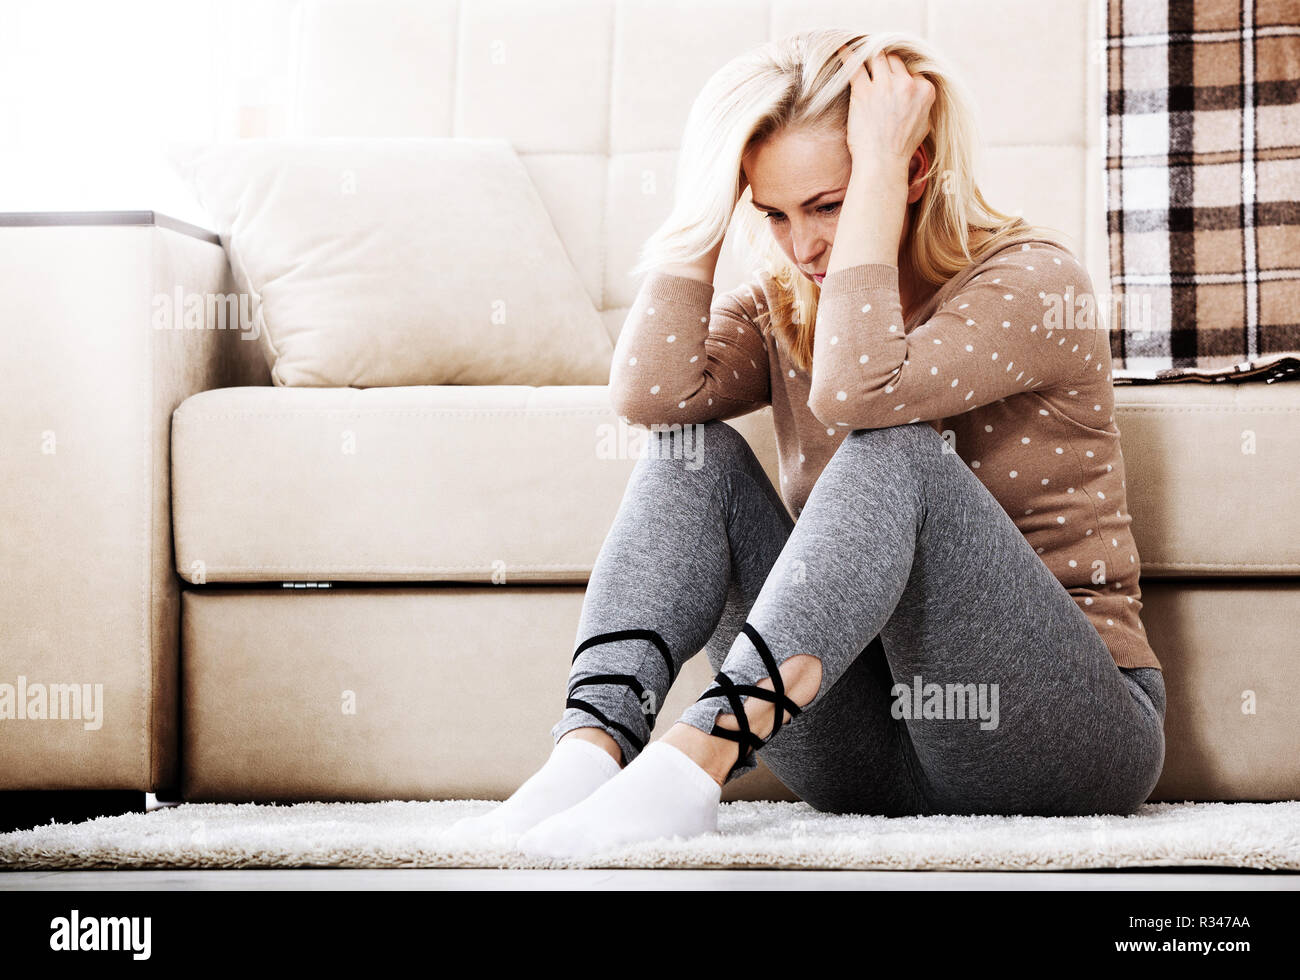 Depression. Middle aged barefoot woman sitting at the floor embracing her knees, near sofa at home, her head down, bored, troubled with domestic violence. Stock Photo